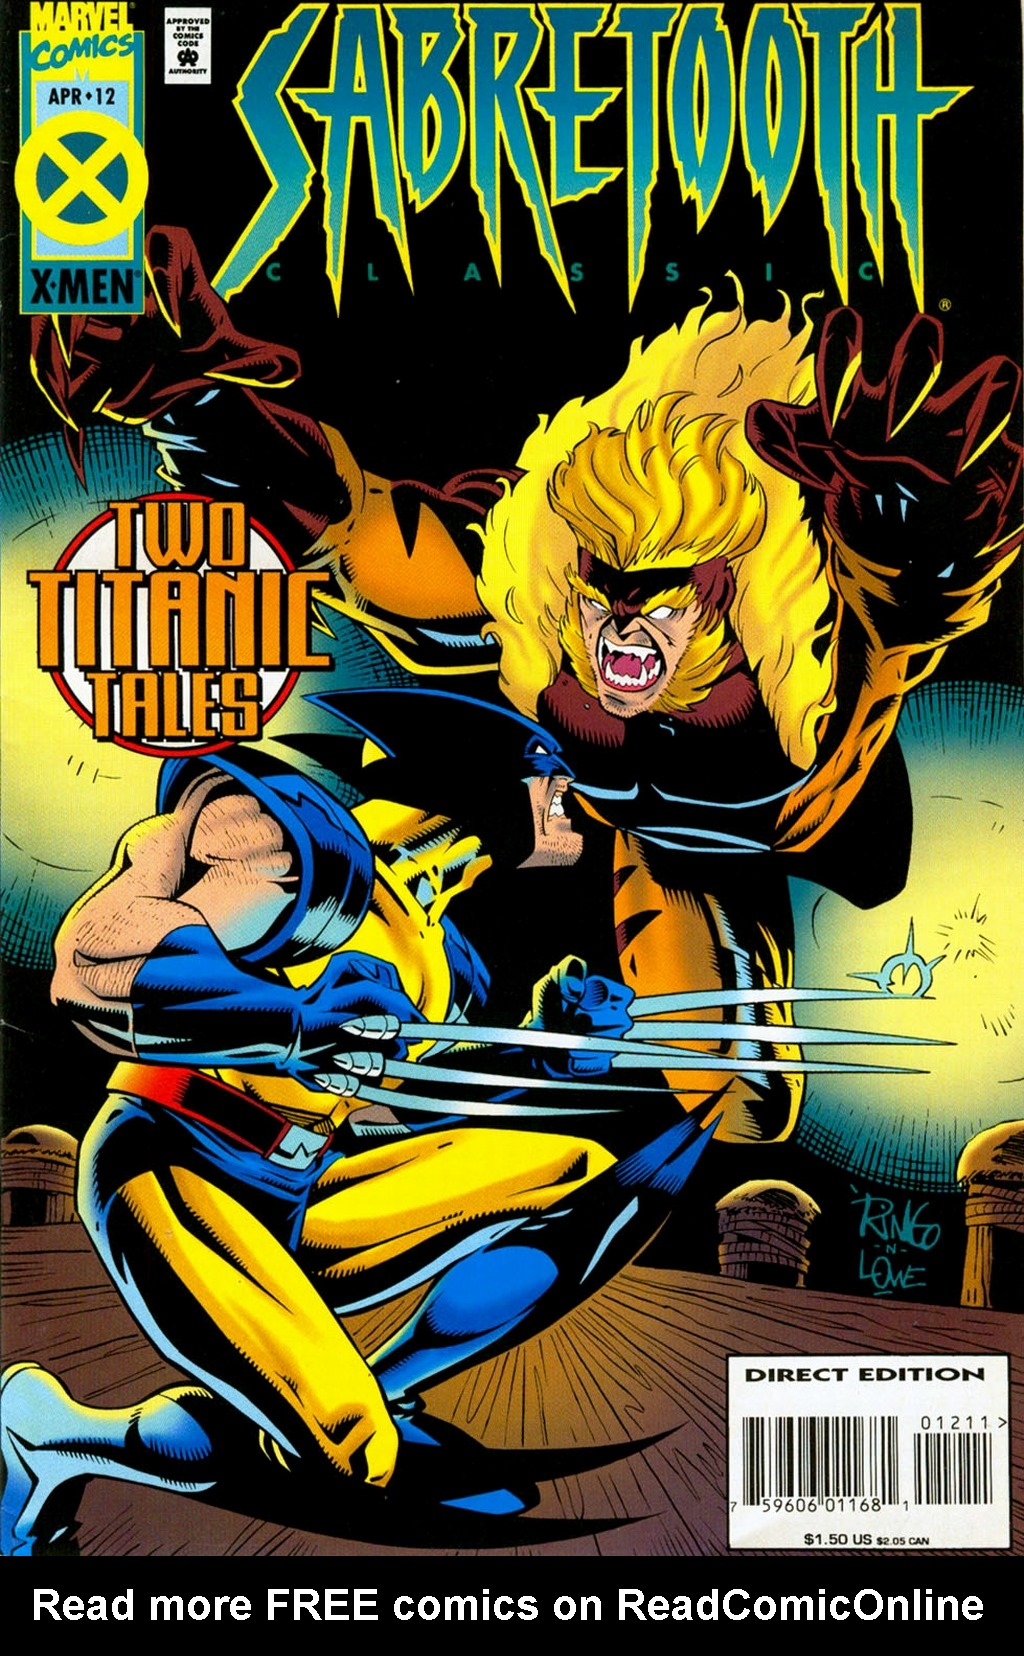 Read online Sabretooth Classic comic -  Issue #12 - 1